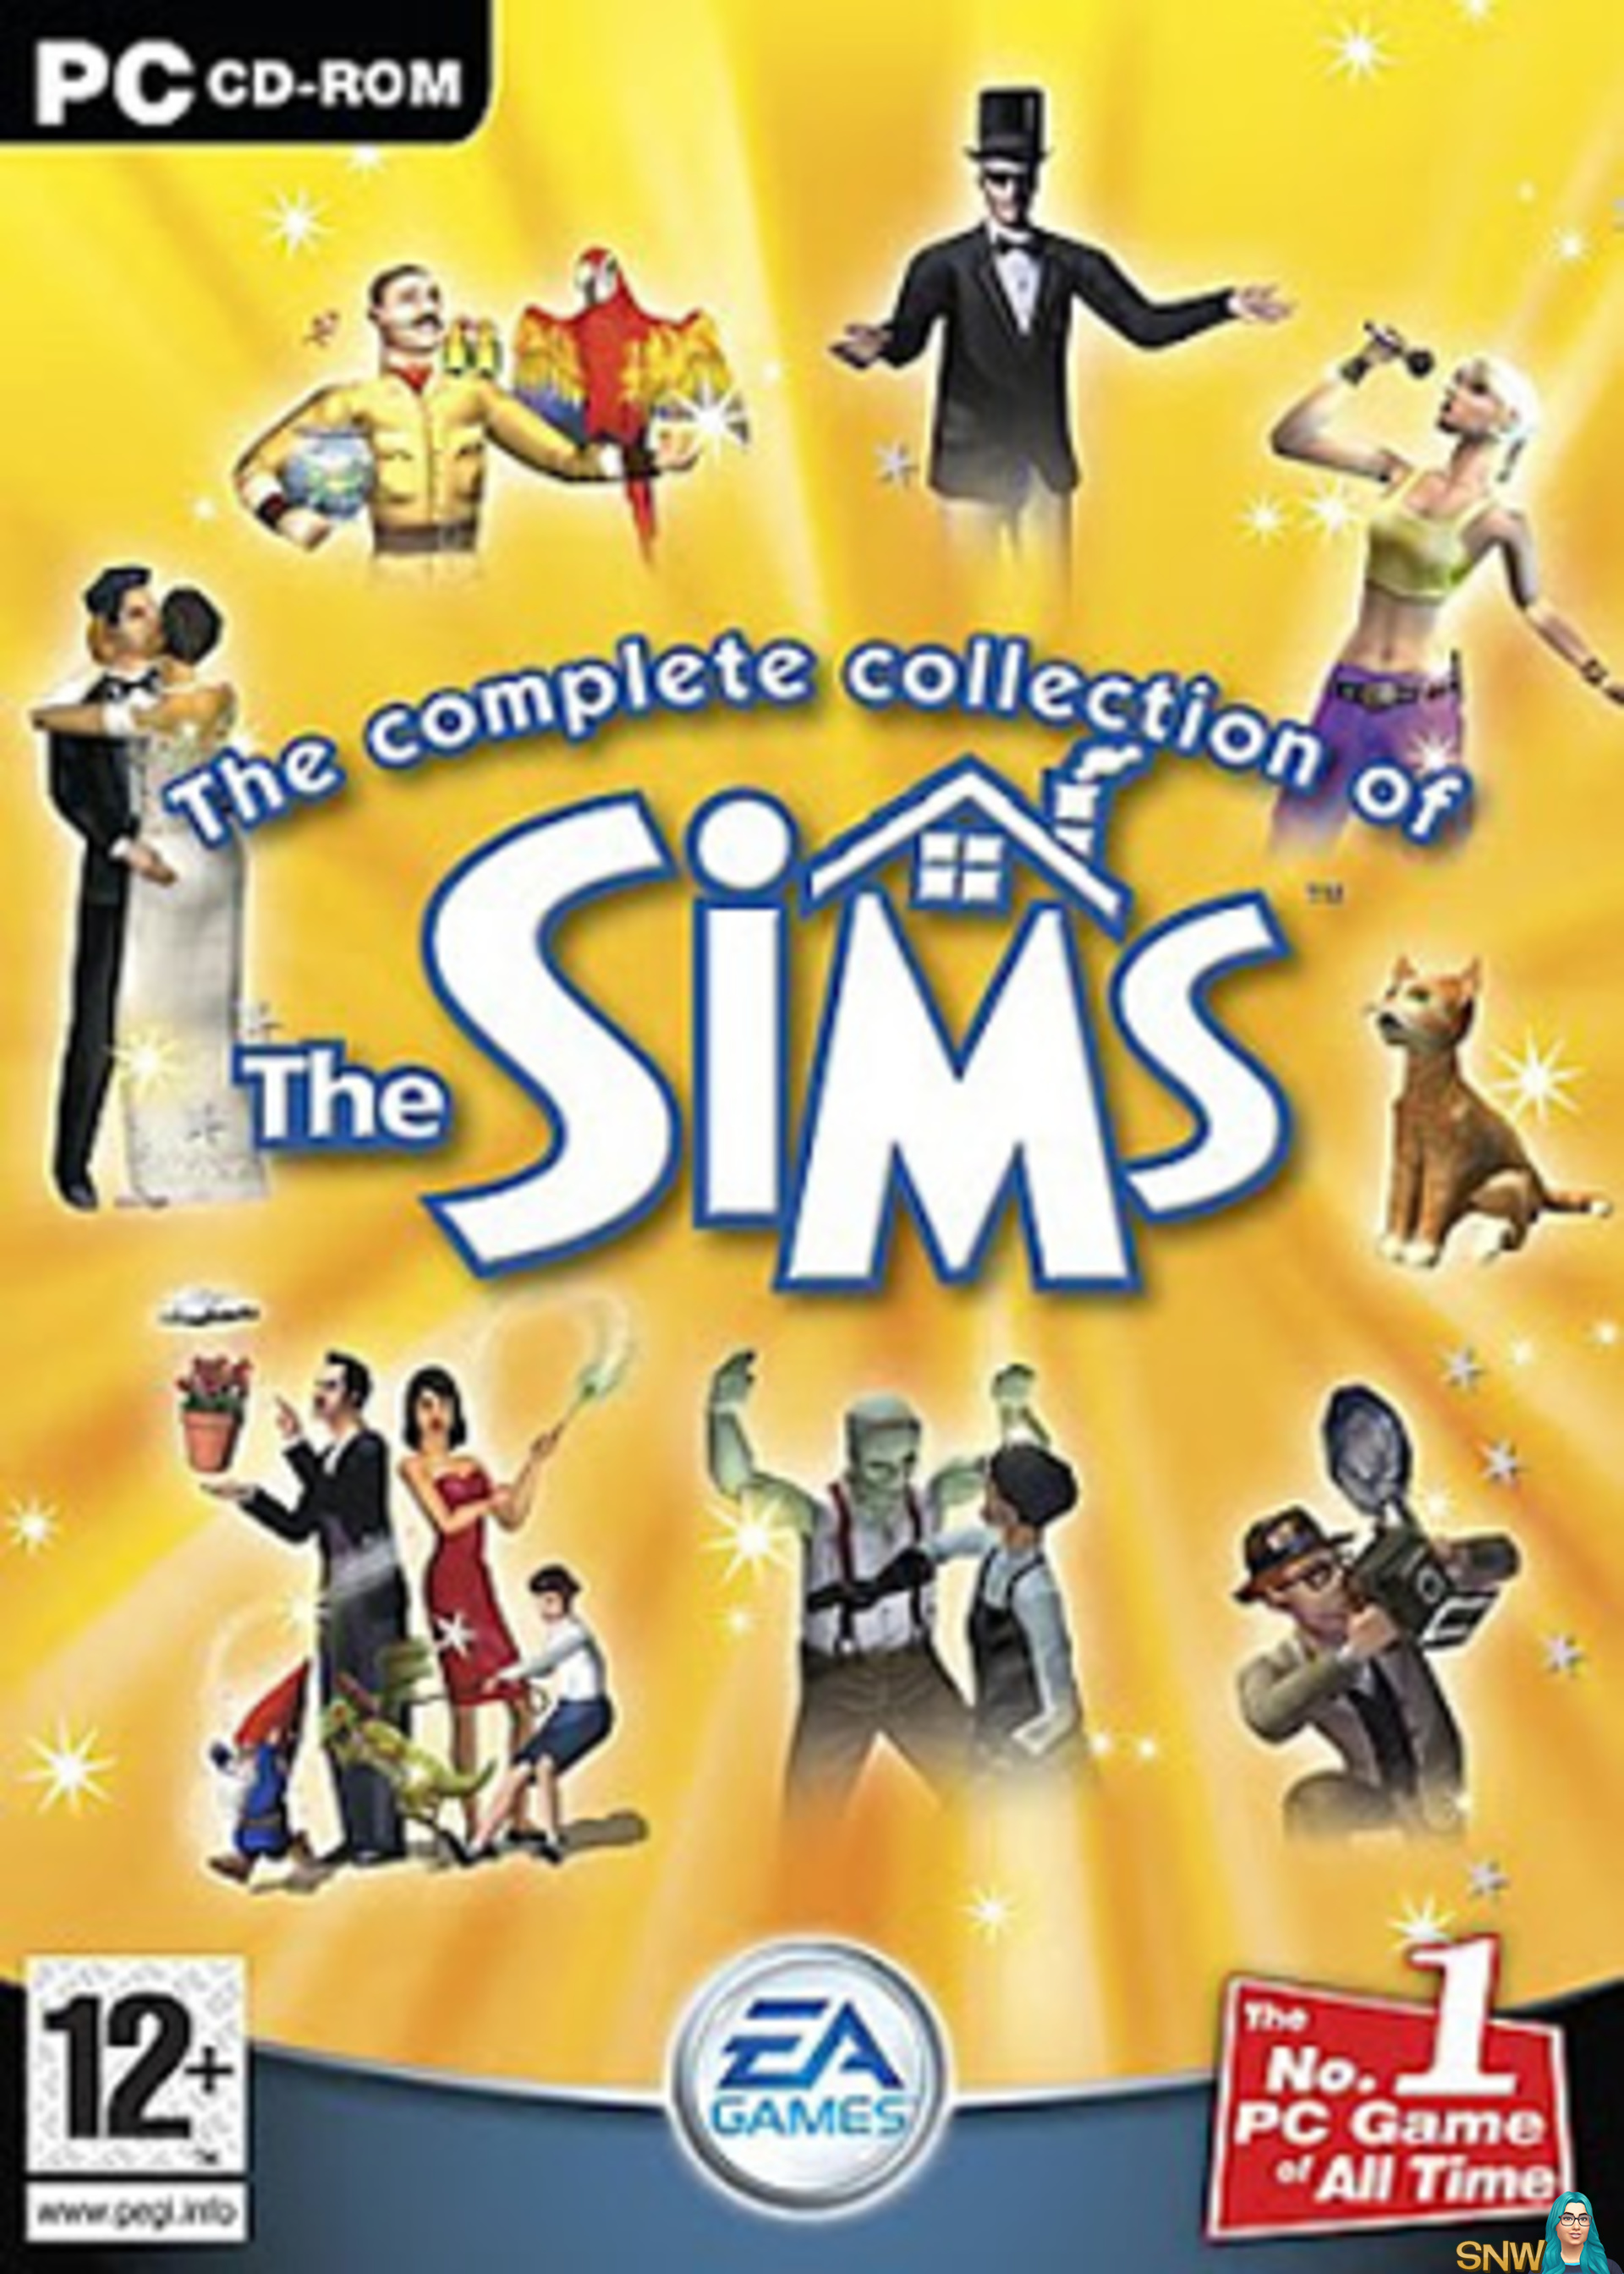 sims 3 complete collection free download torrent